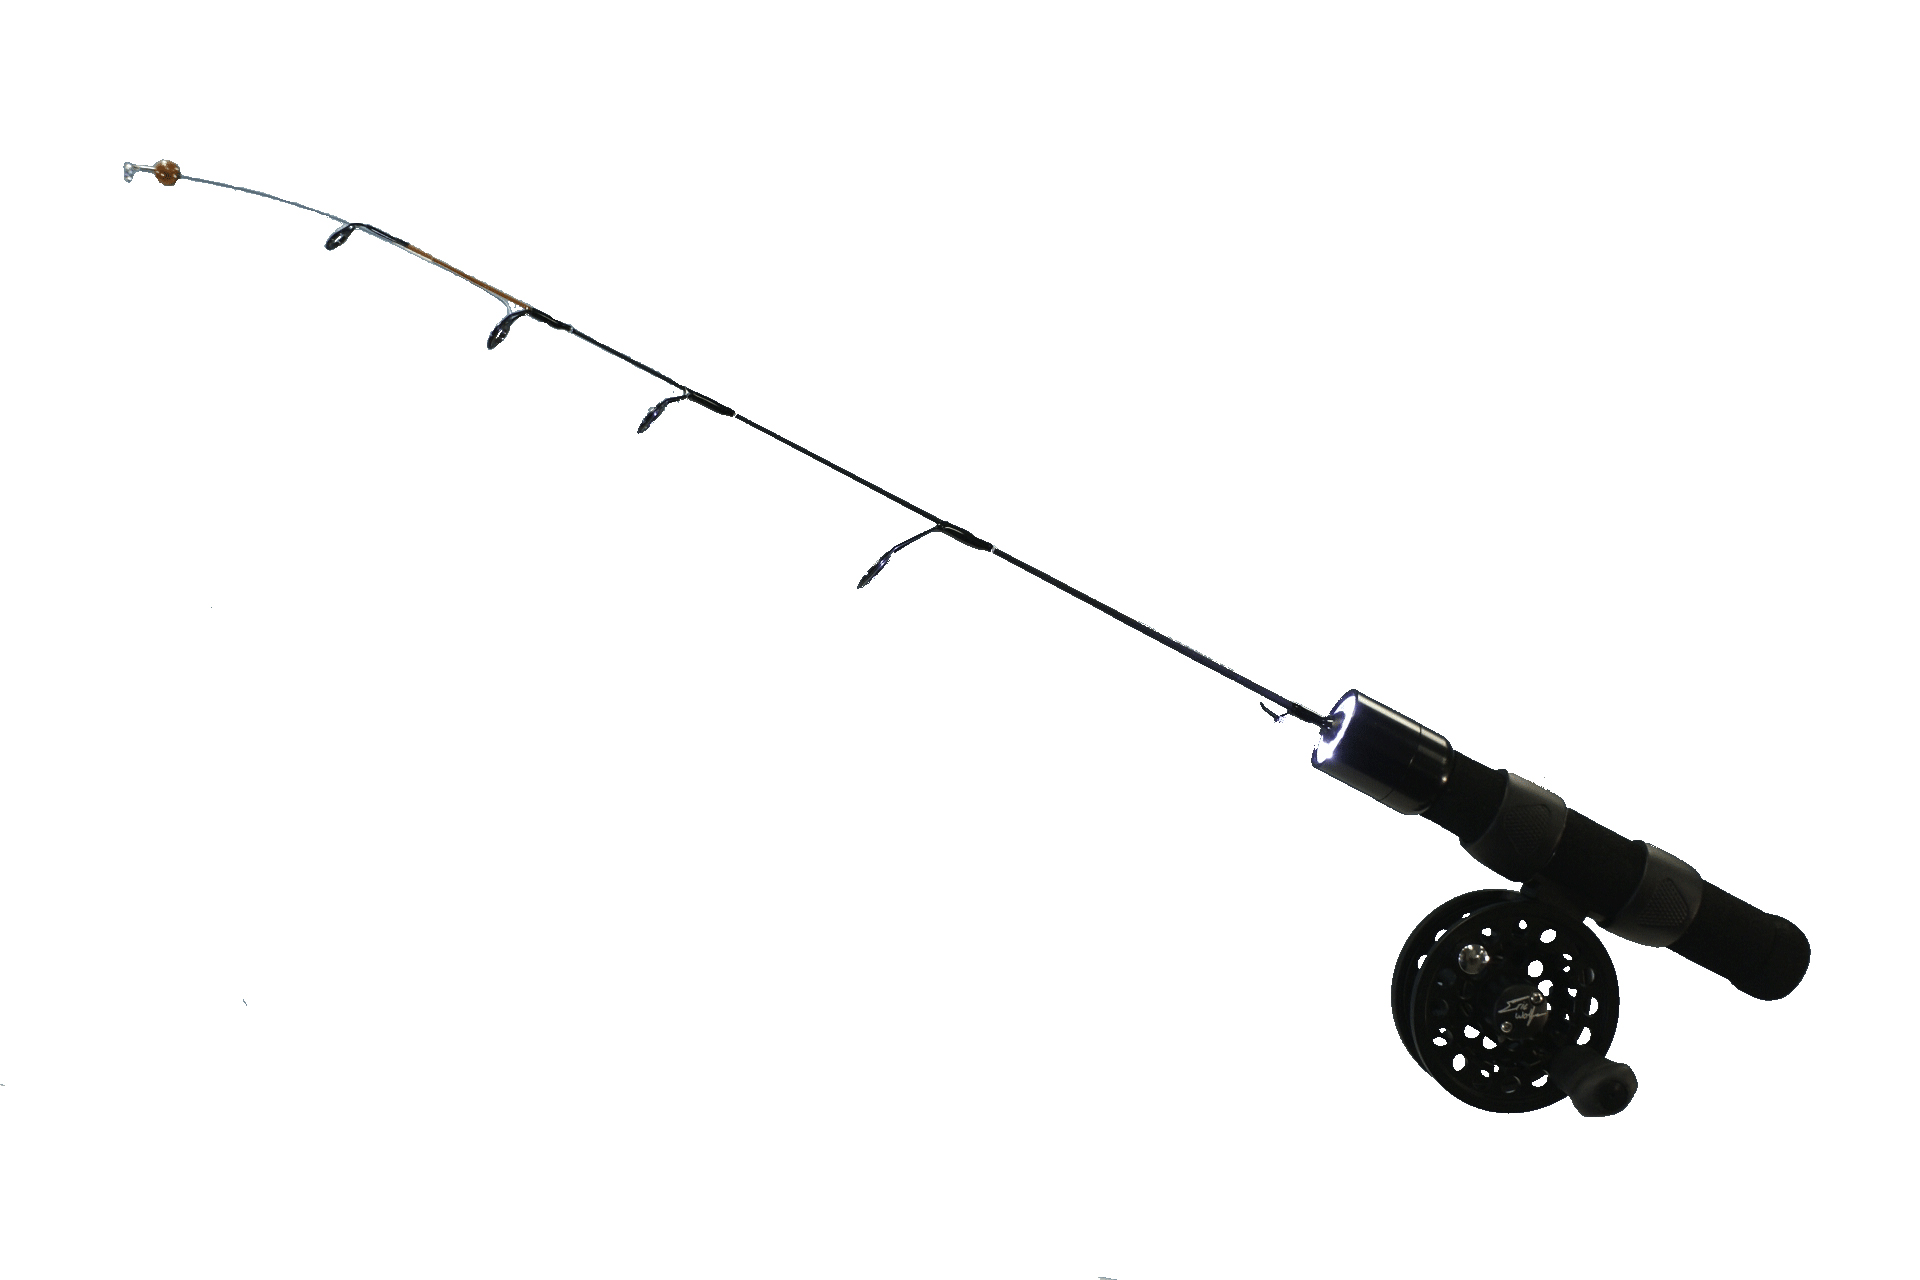 Download Free Fishing Rod, Download Free Clip Art, Free Clip Art on ...